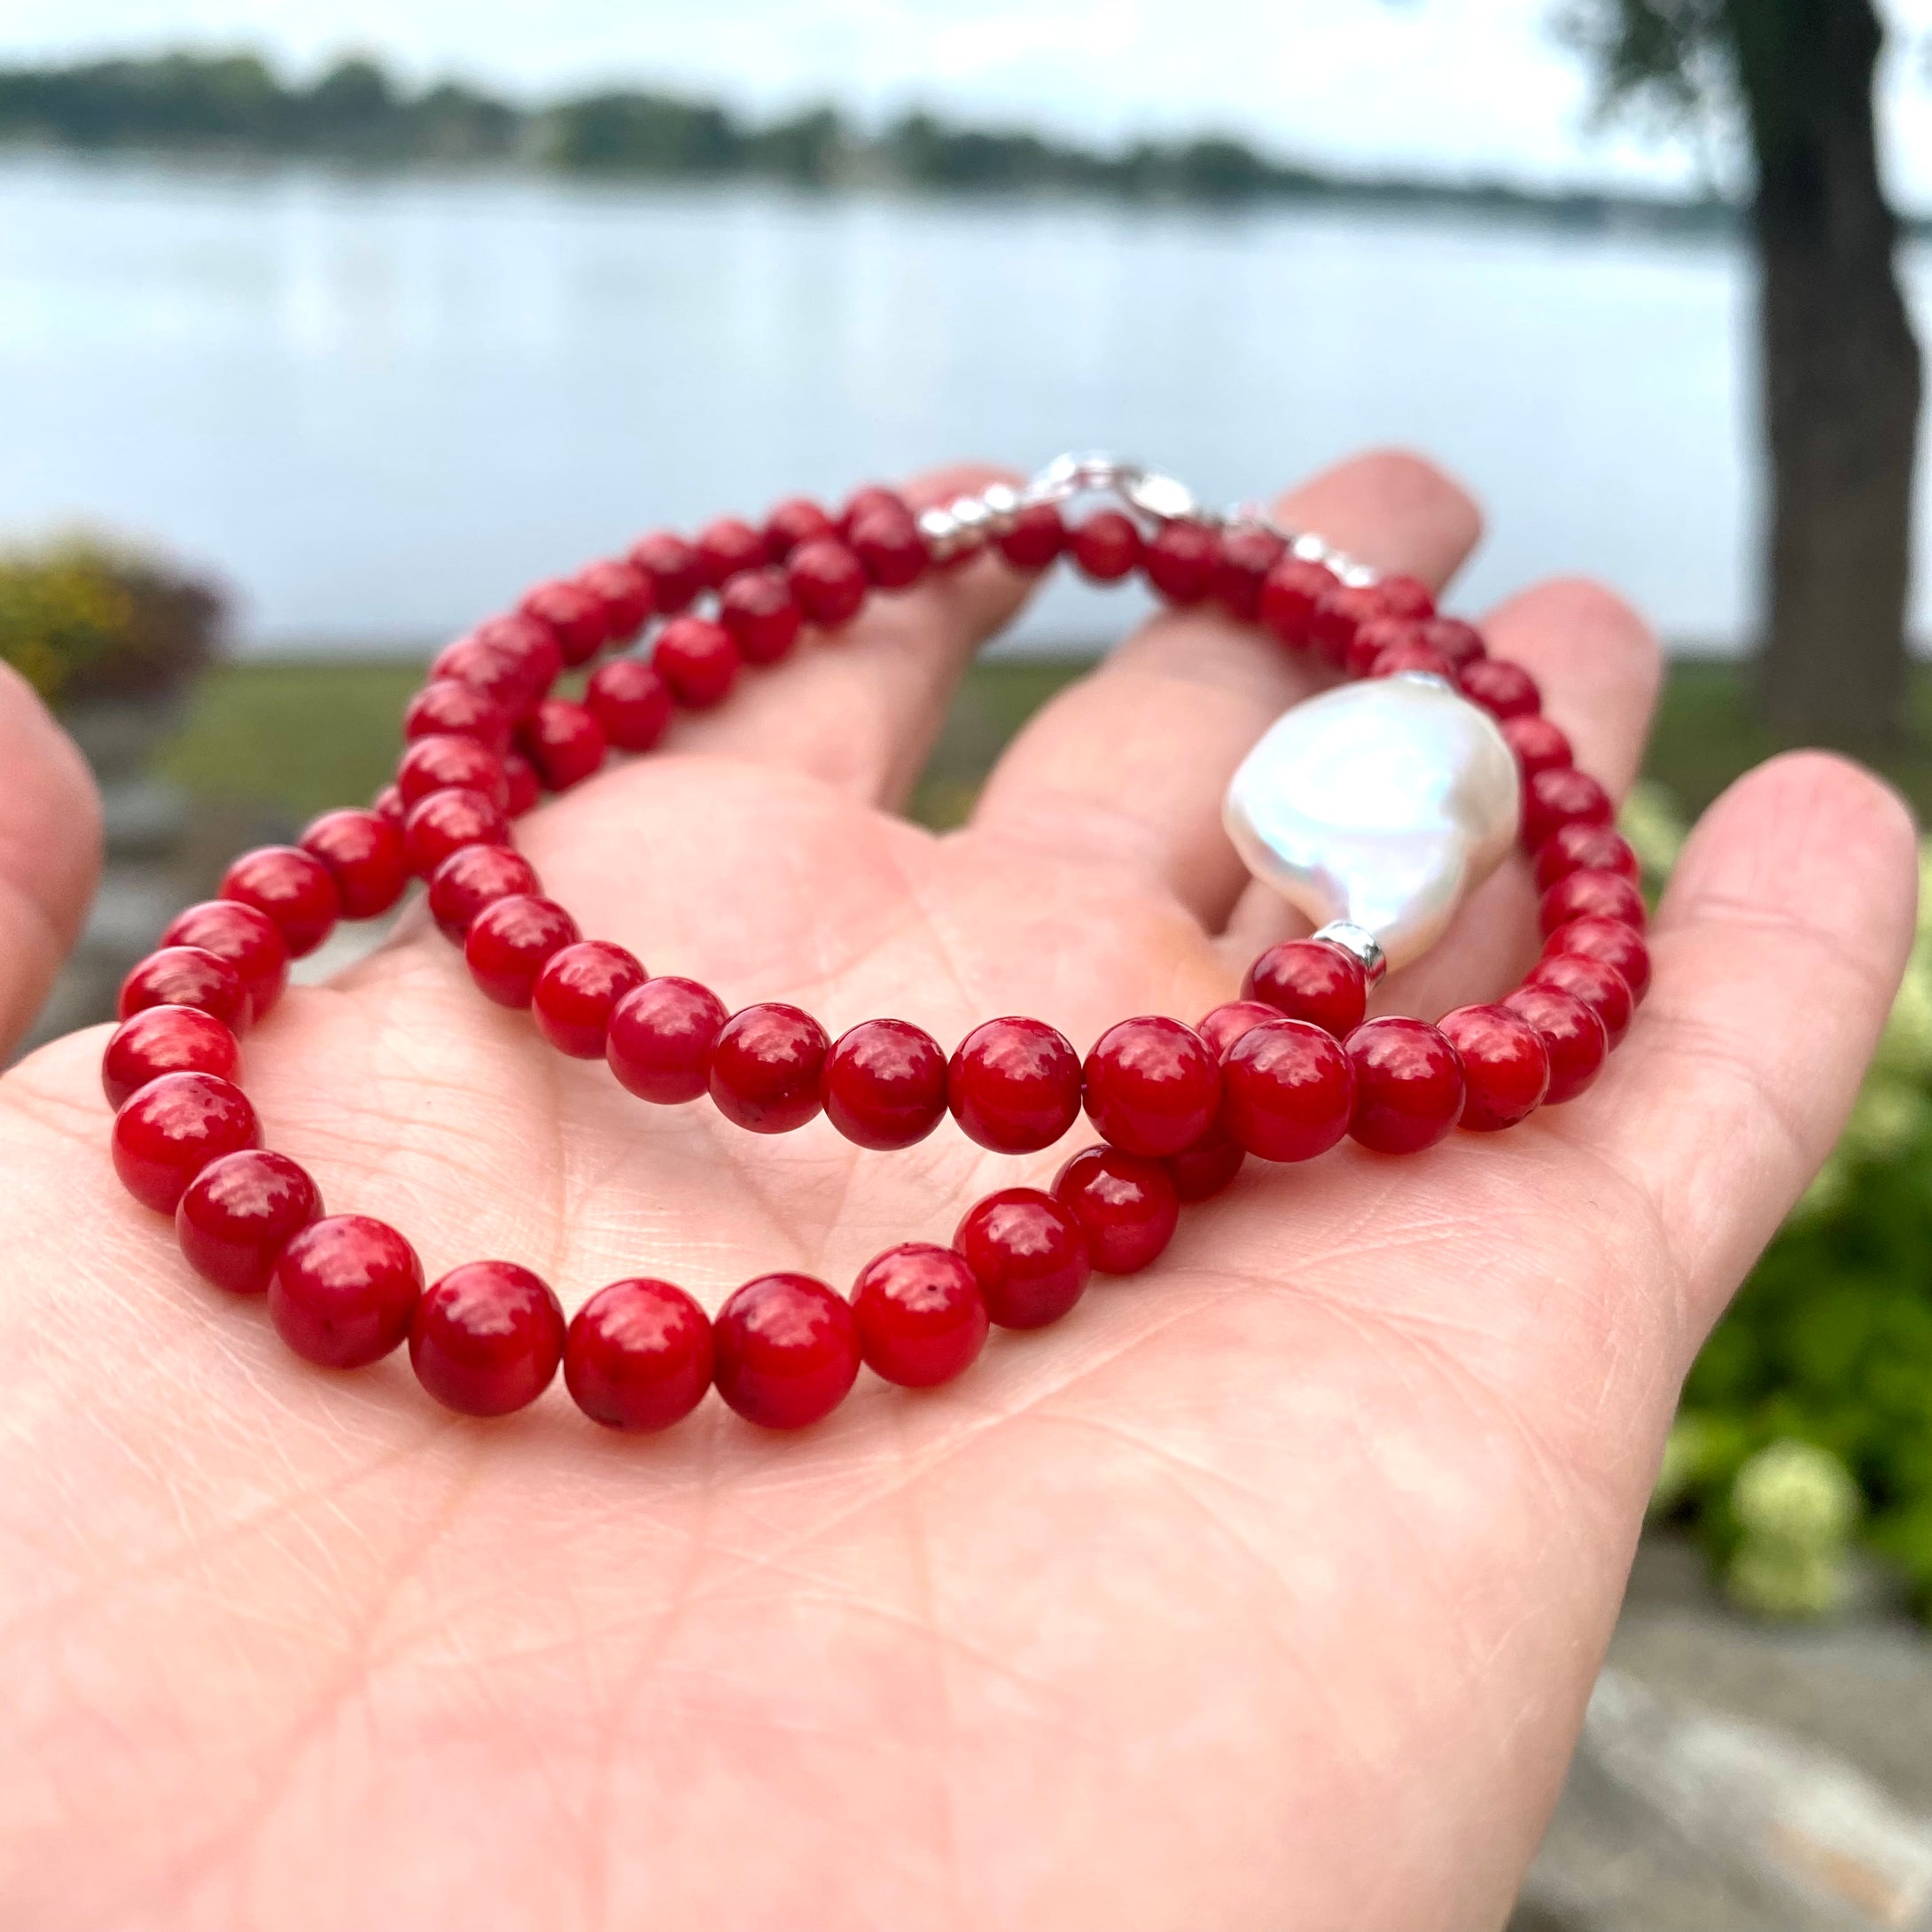 Red Coral Short Necklace with Natural Baroque Pearl and Sterling Silver Details, 18